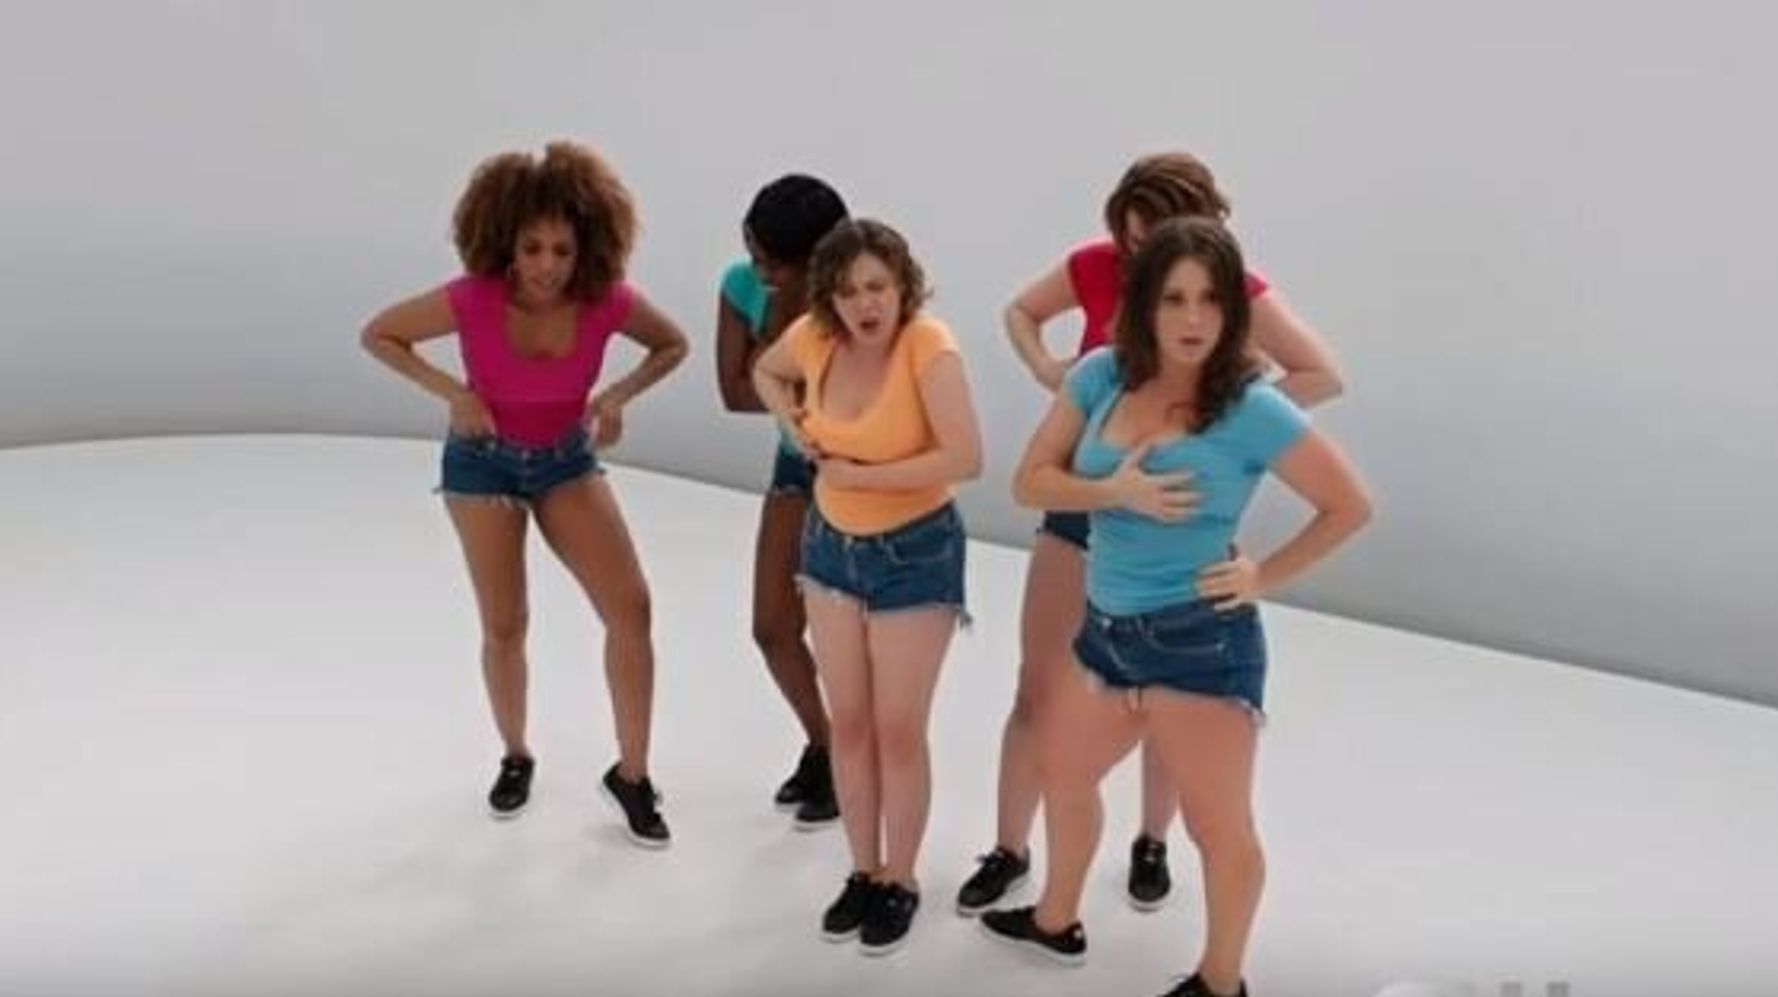 This 'Heavy Boobs' Rap Will Make Your Boobs Hurt